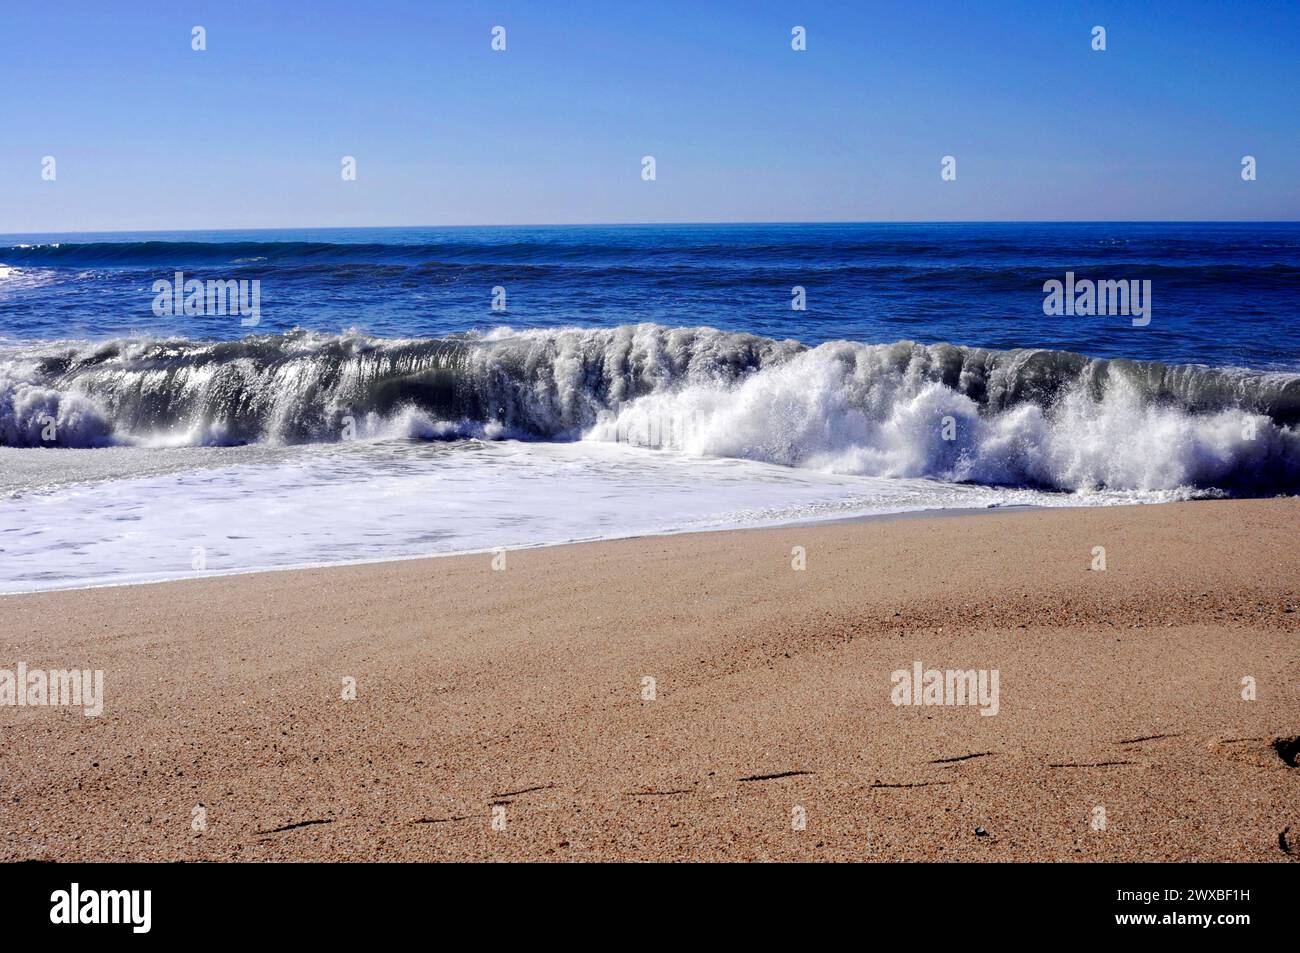 A wave breaks on a sandy beach with visible footprints in the foreground, near Vila Cha, Porto, Northern Portugal, Portugal Stock Photo